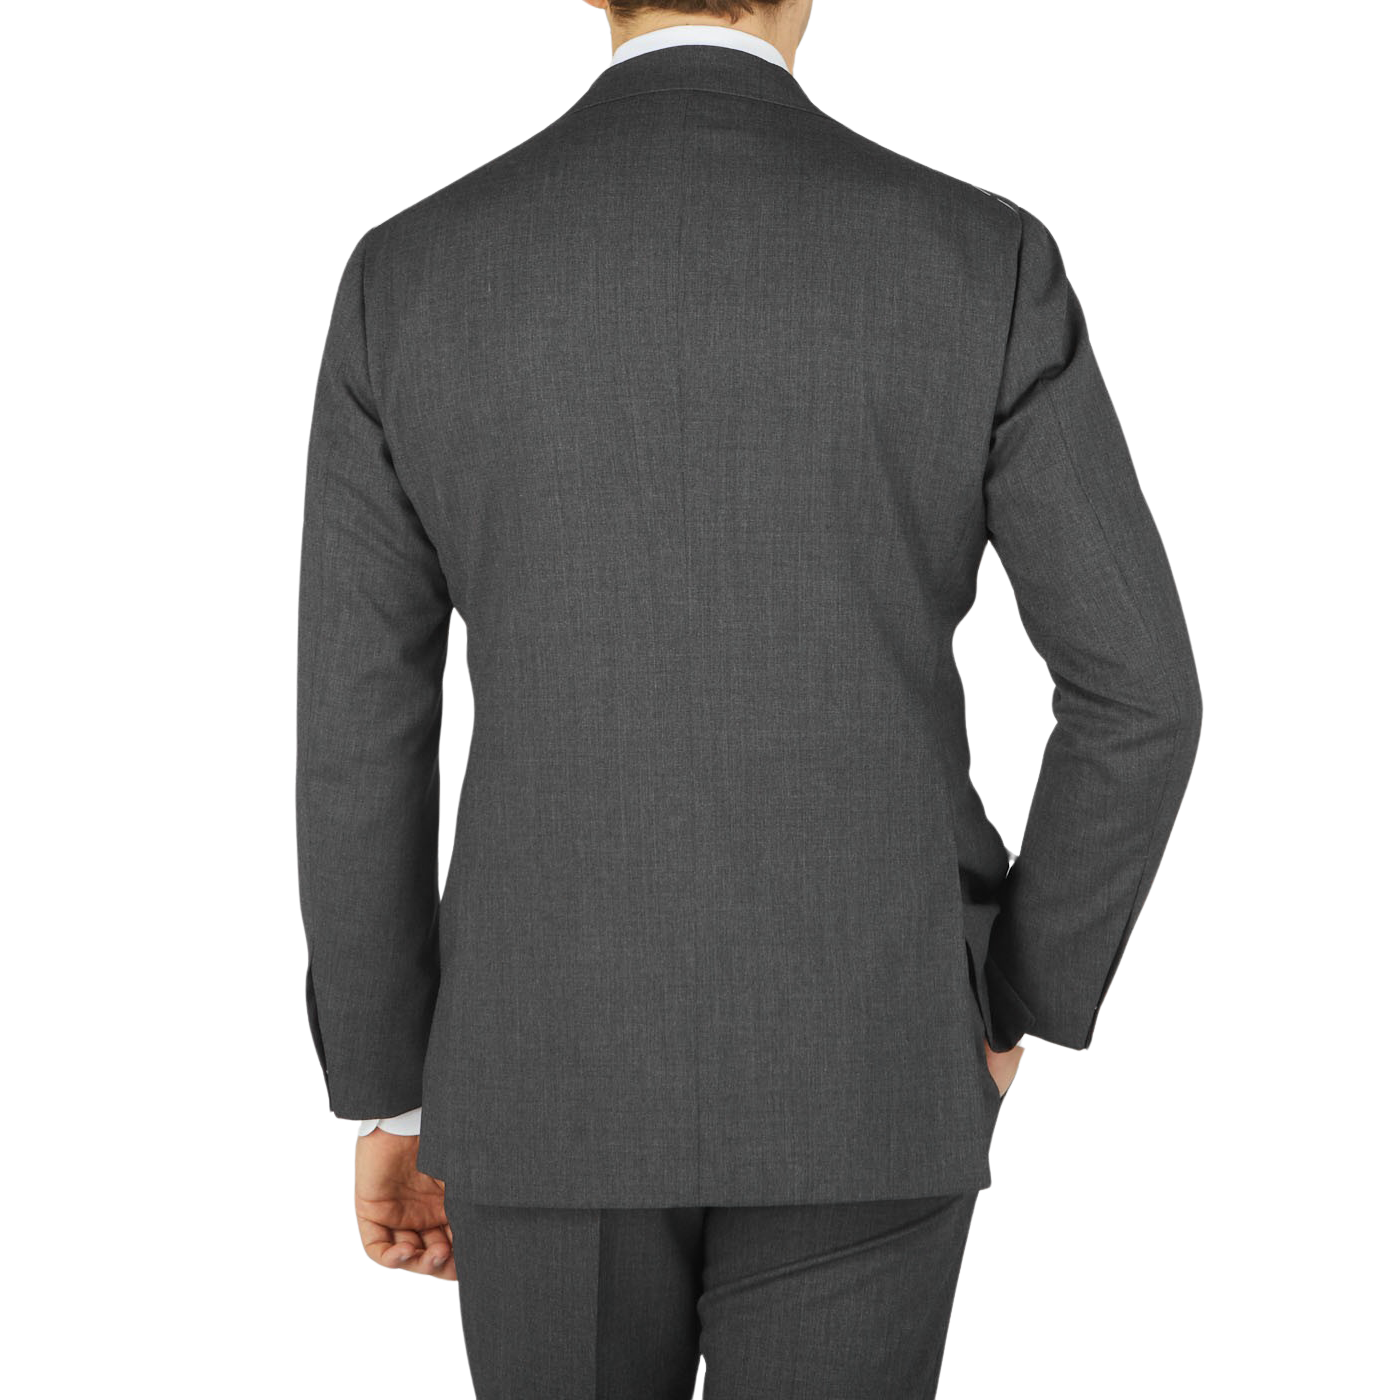 The back view of a man in a Ring Jacket Grey High Twist Wool Suit.